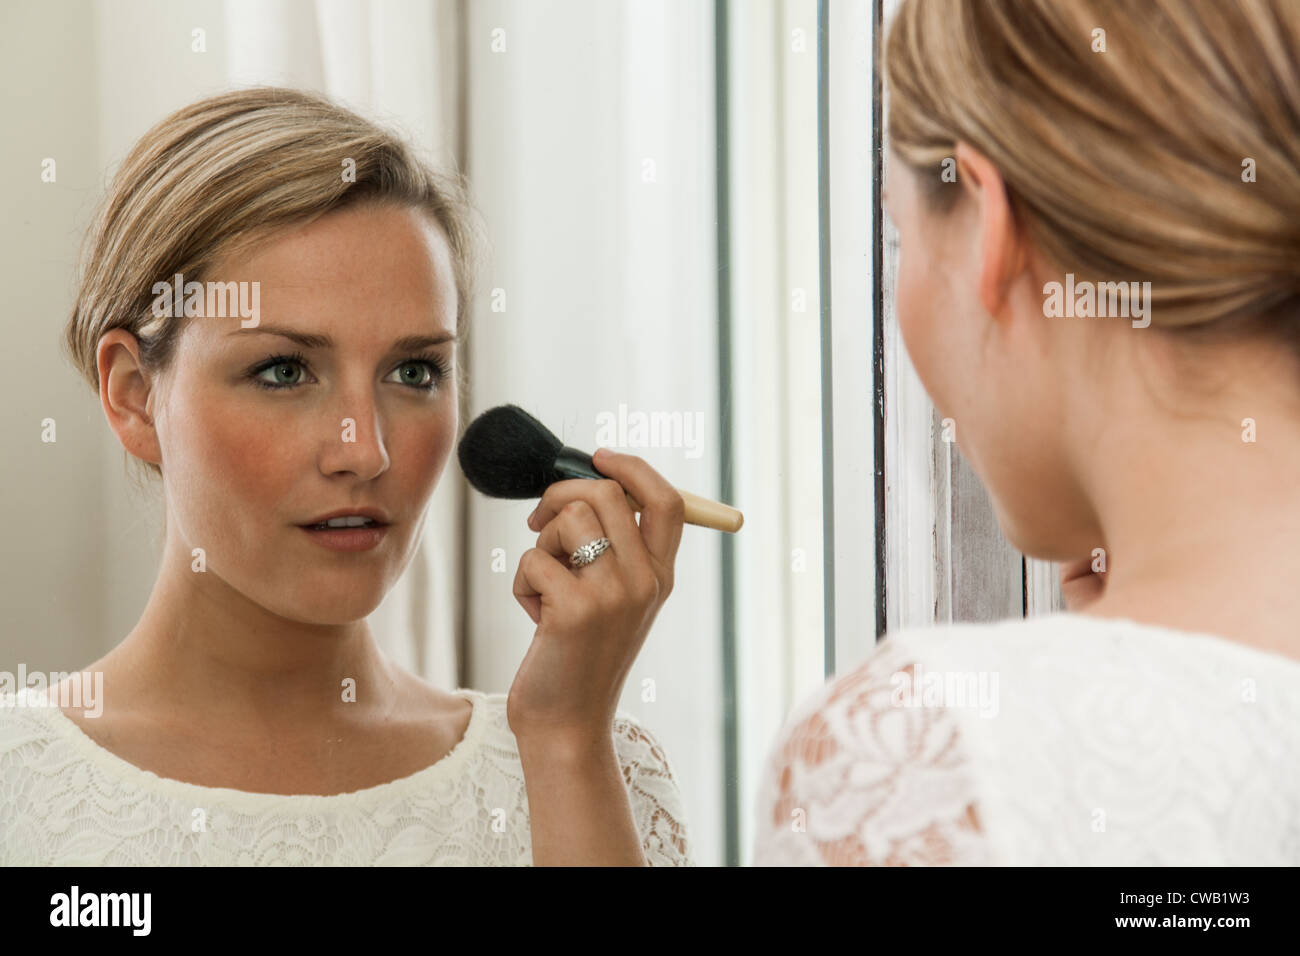 Woman in a white dress, applying blusher in a mirror Stock Photo